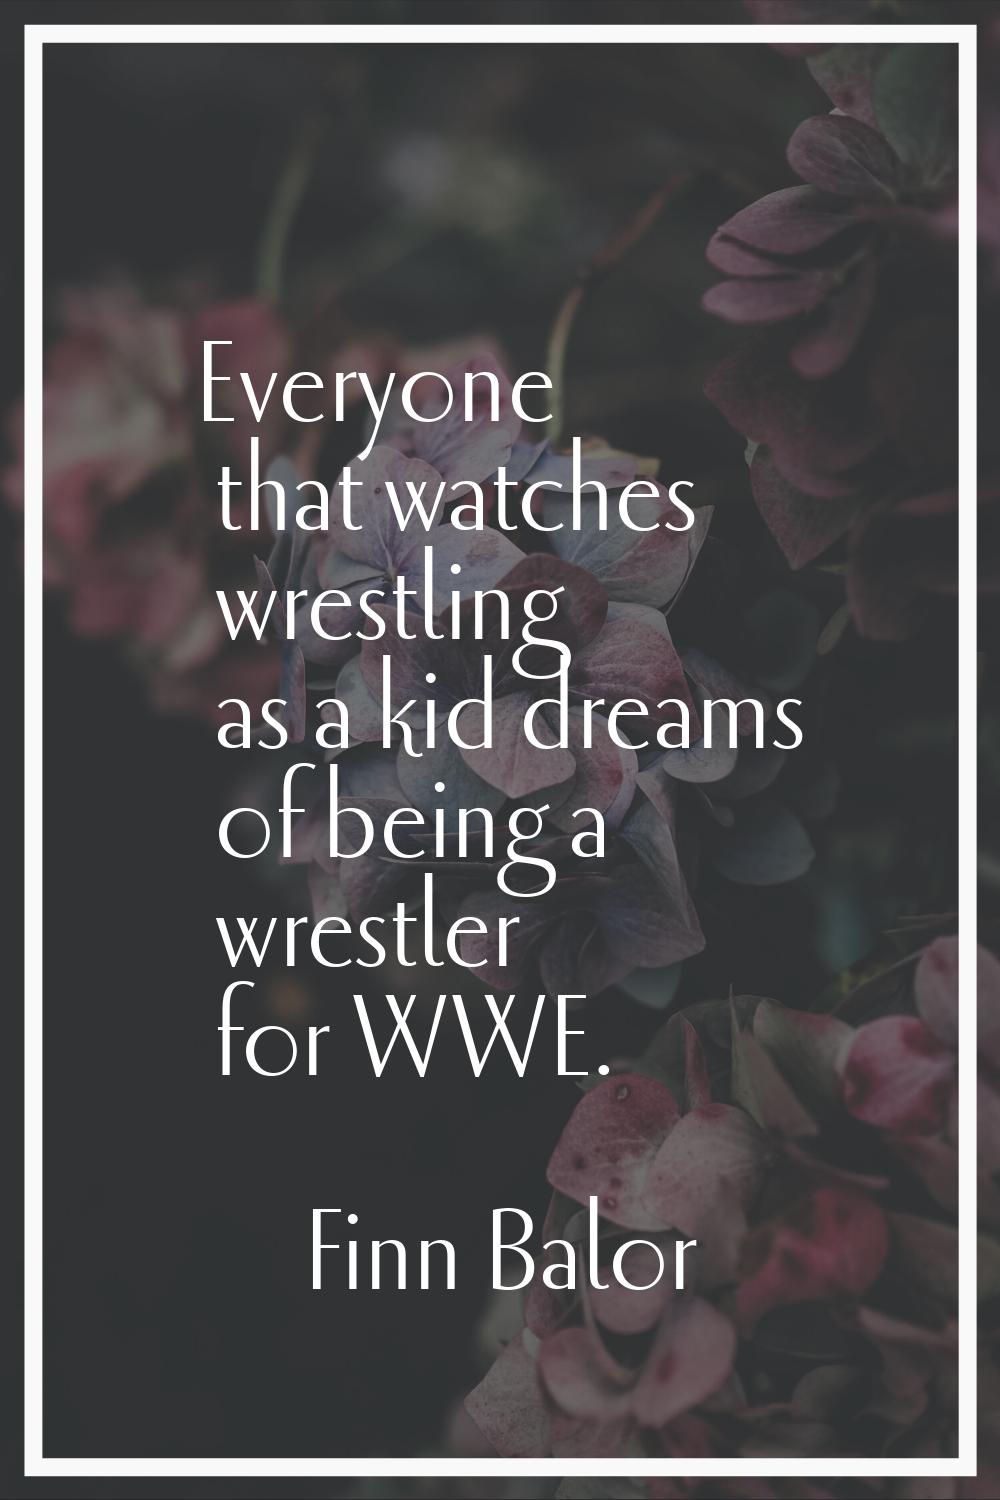 Everyone that watches wrestling as a kid dreams of being a wrestler for WWE.